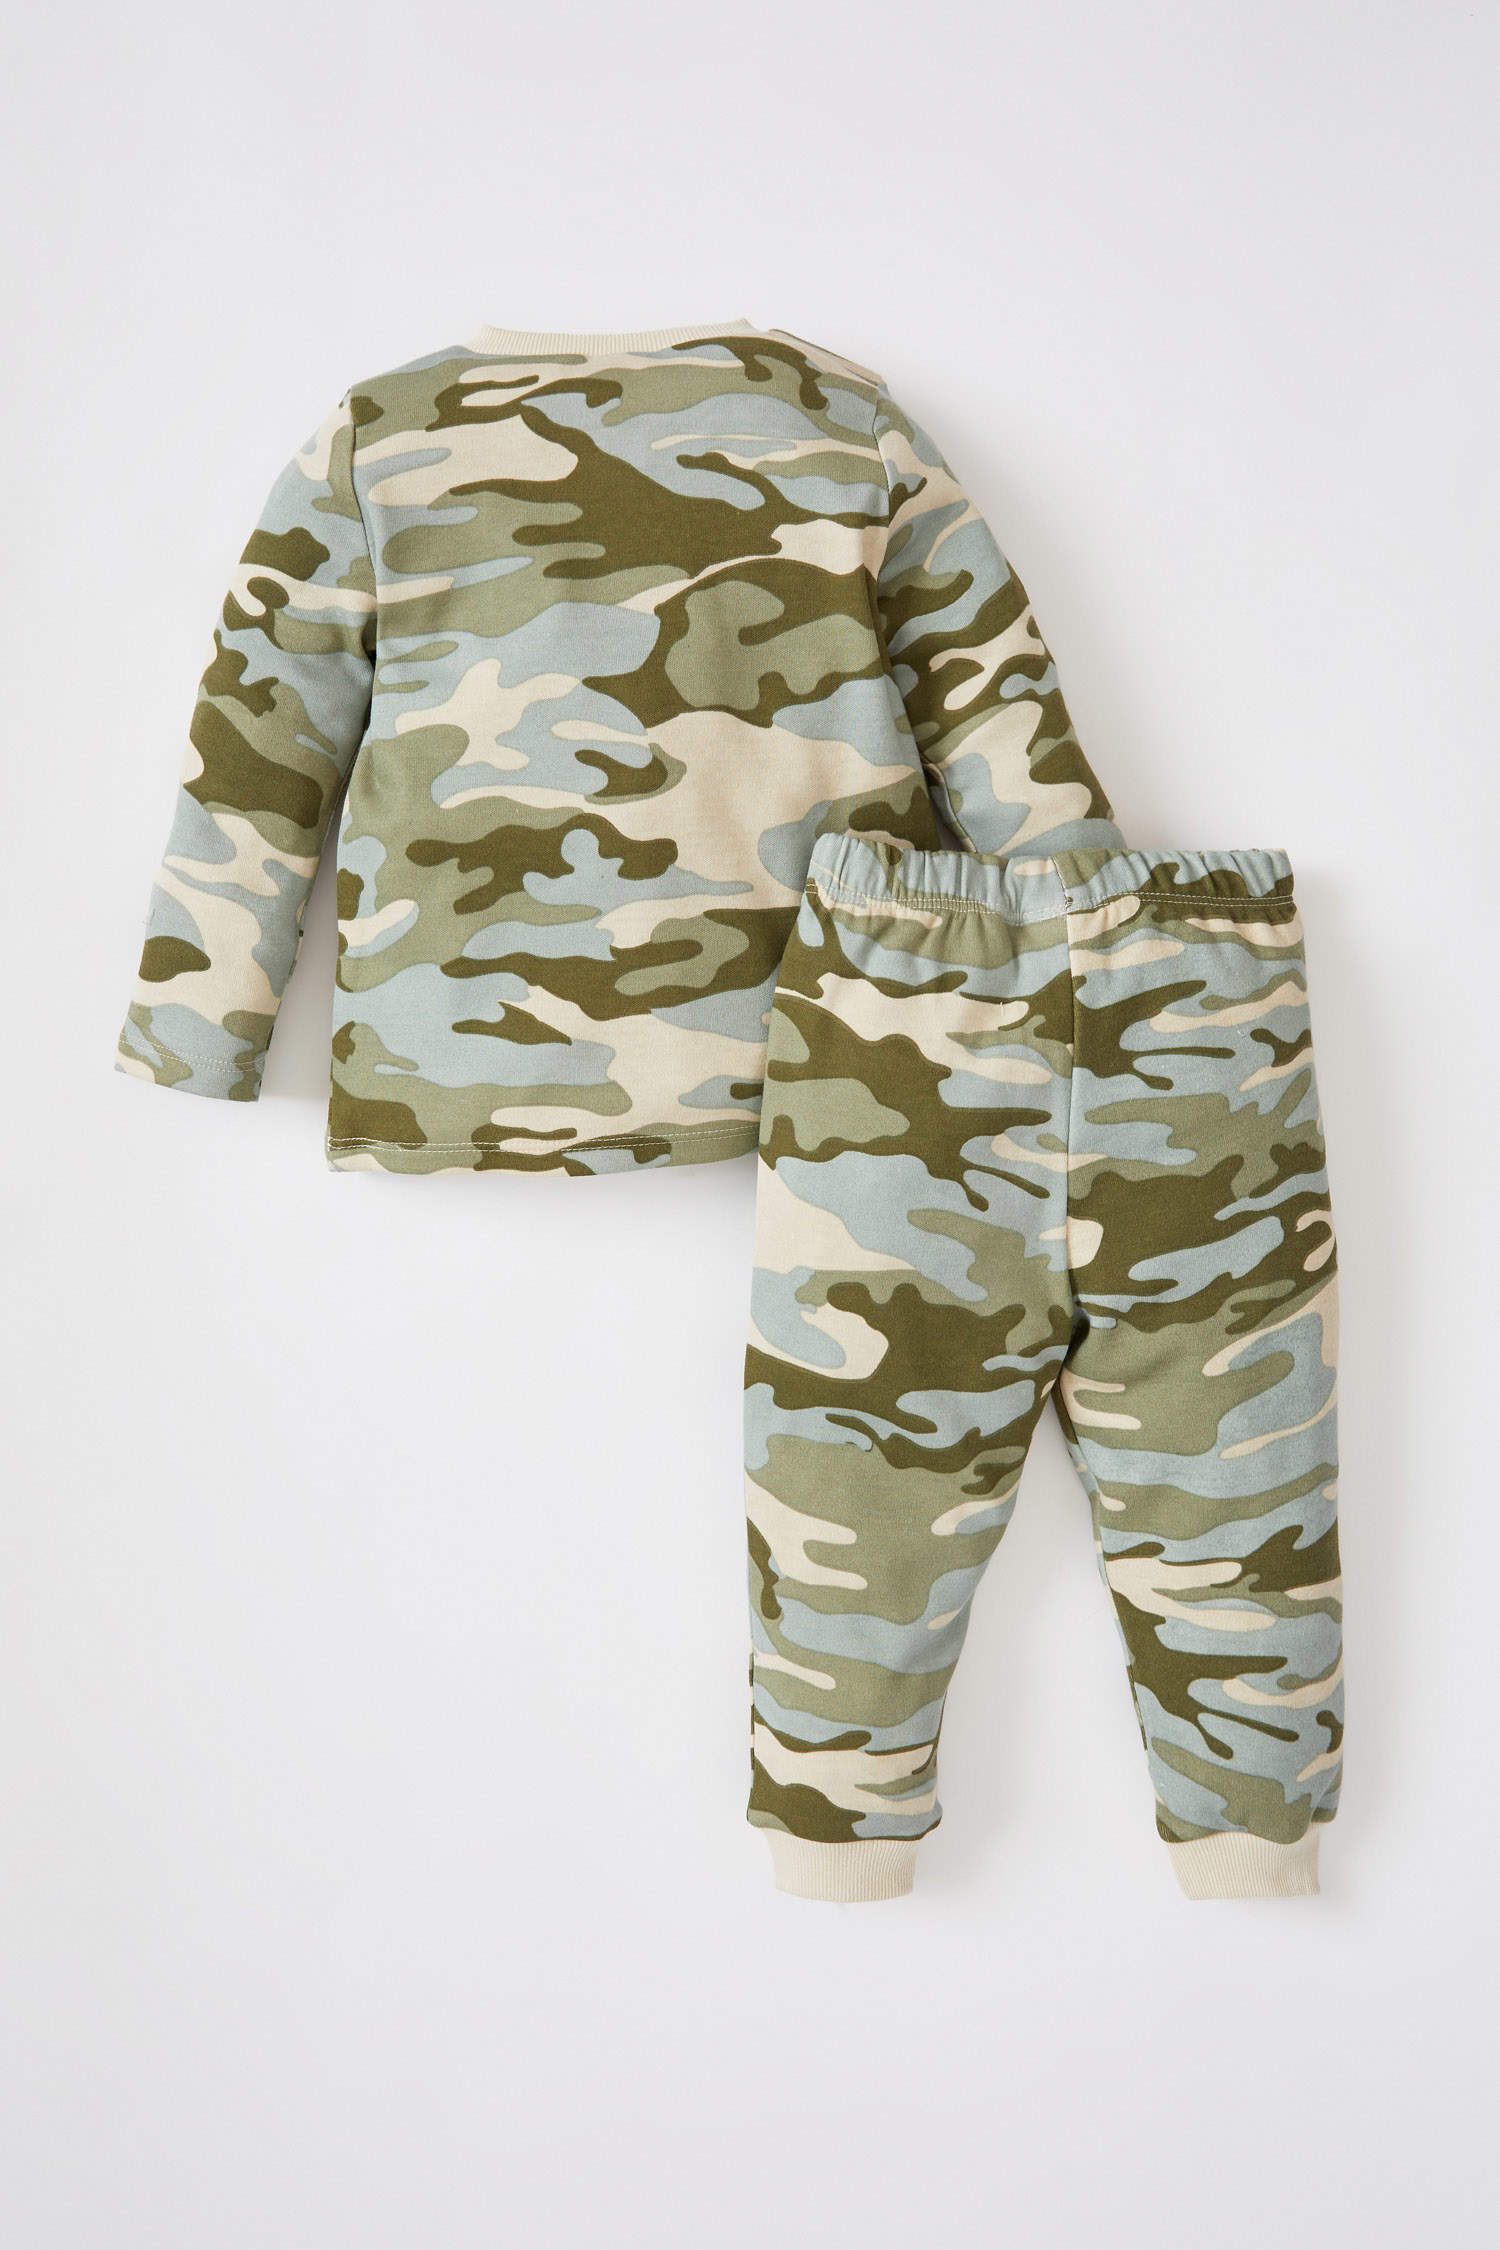 Green BABY BOY 2 piece Regular Fit Crew Neck Camouflage Patterned